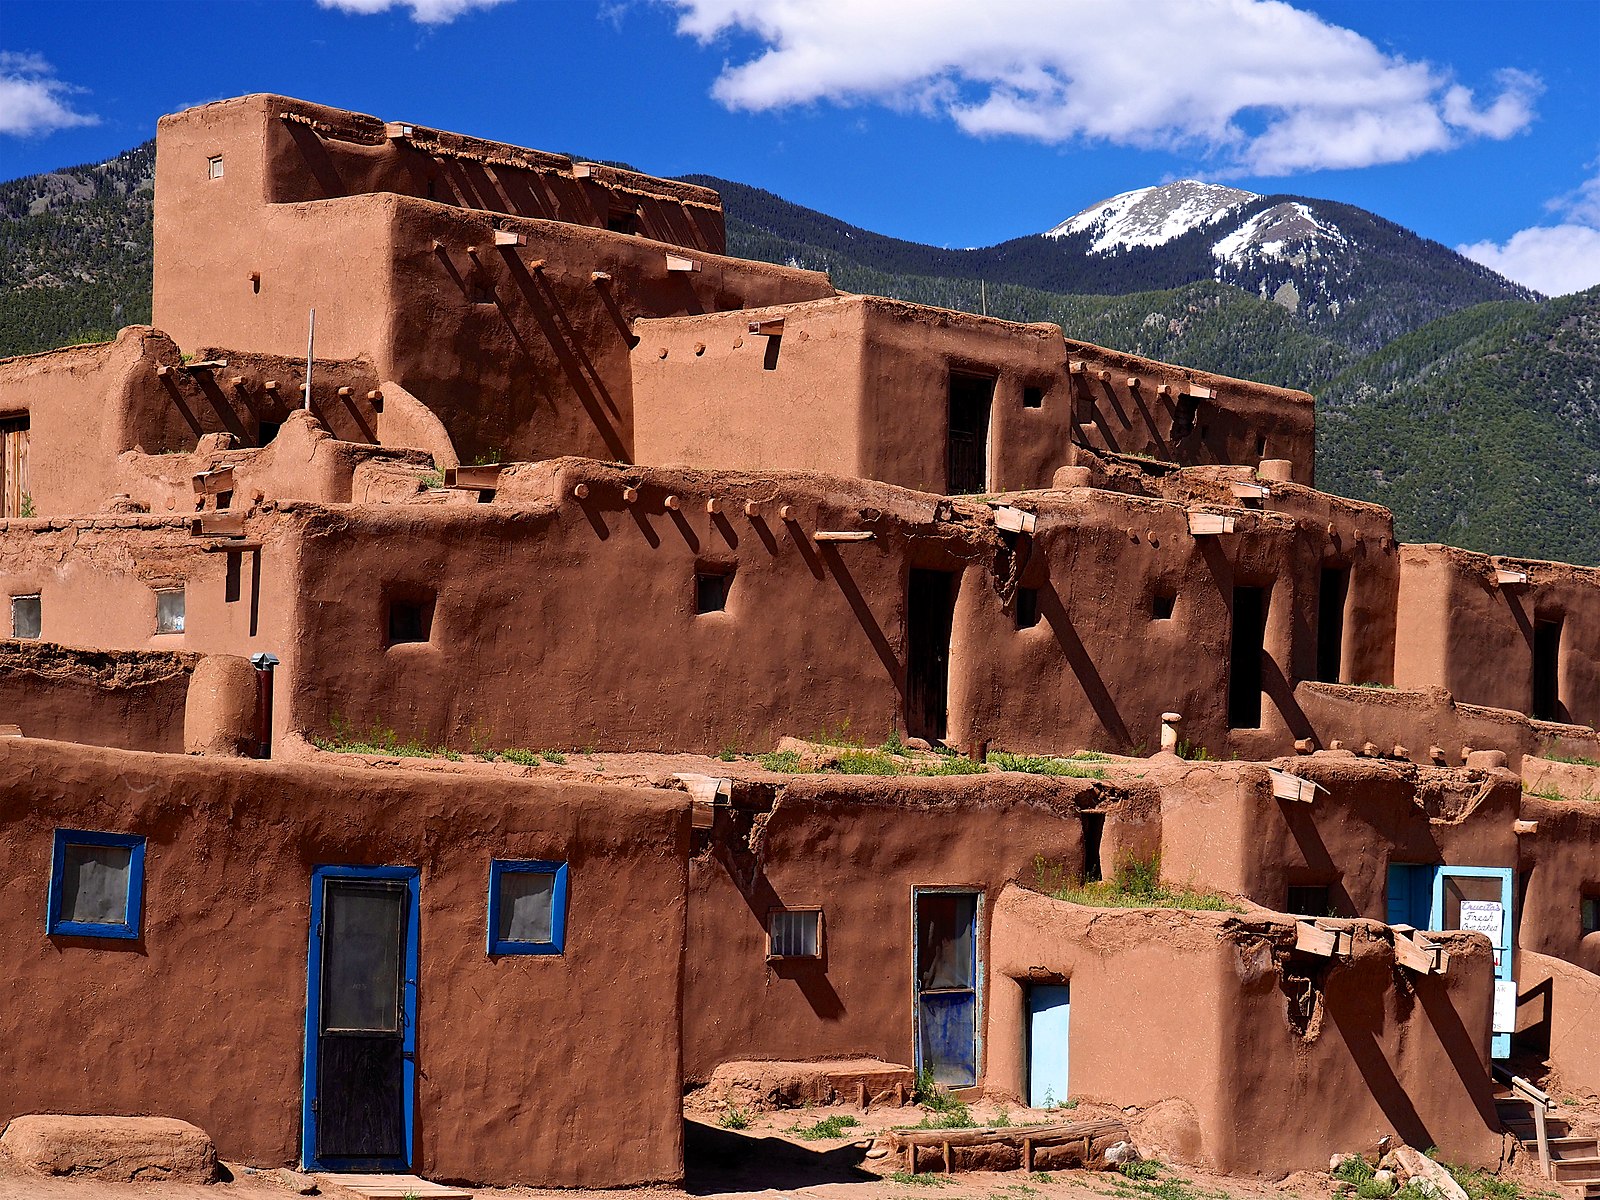 Taos Pueblo in Taos, New Mexico, a multilevel adobe dwelling and one of the most famous examples of Pueblo architecture